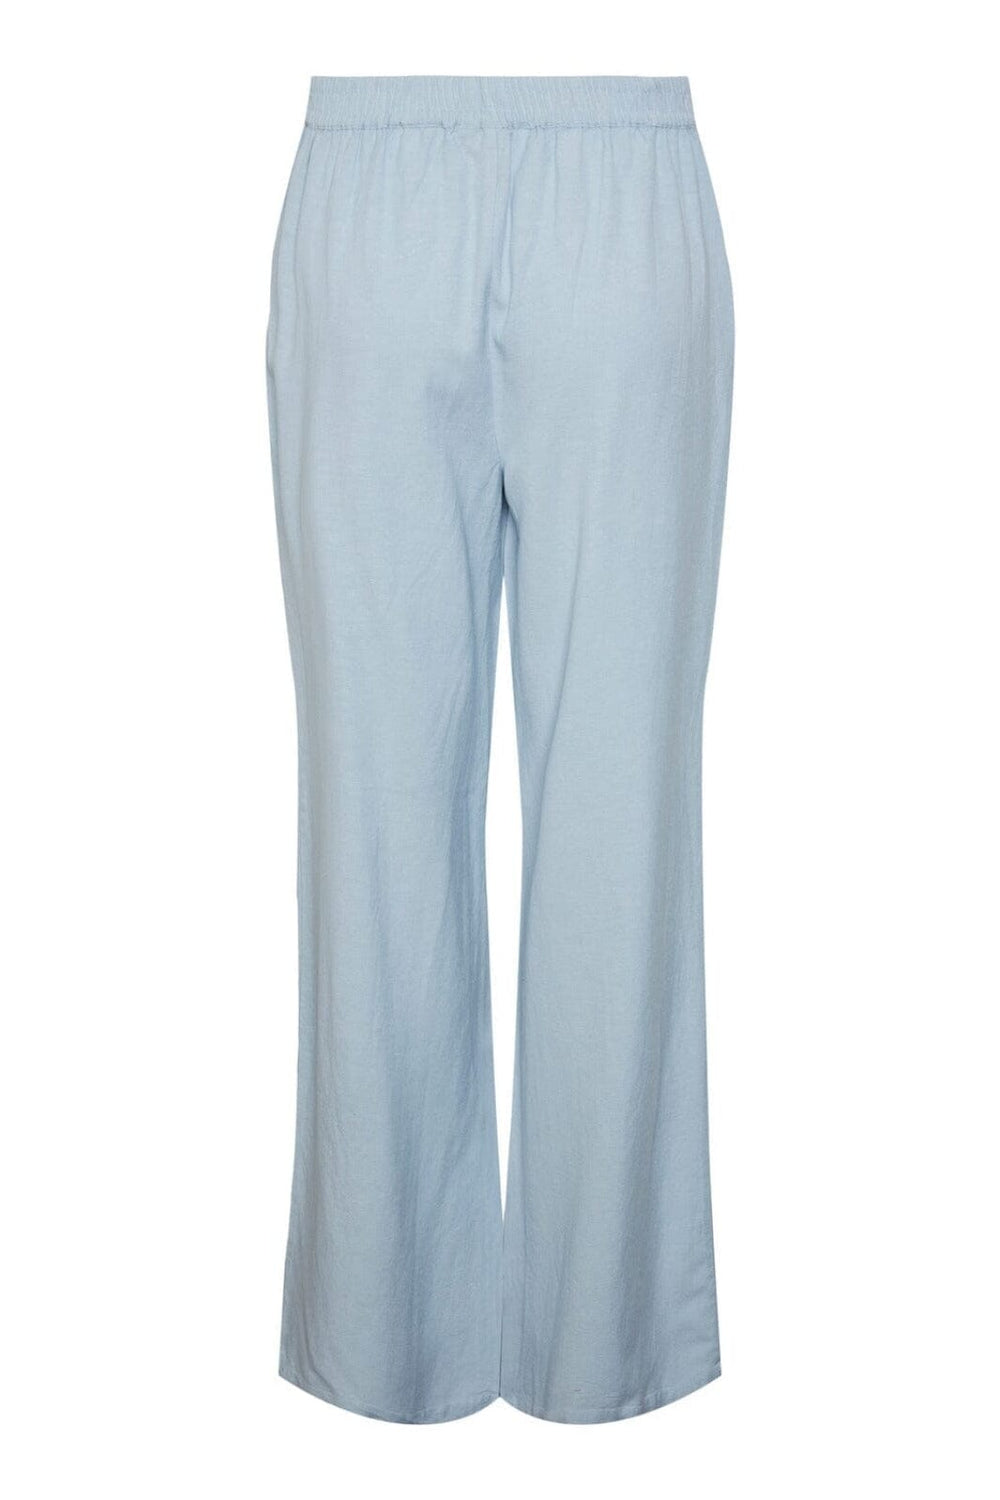 Pieces - Pcmilano Wide Pant - 4368662 Angel Falls Bukser 